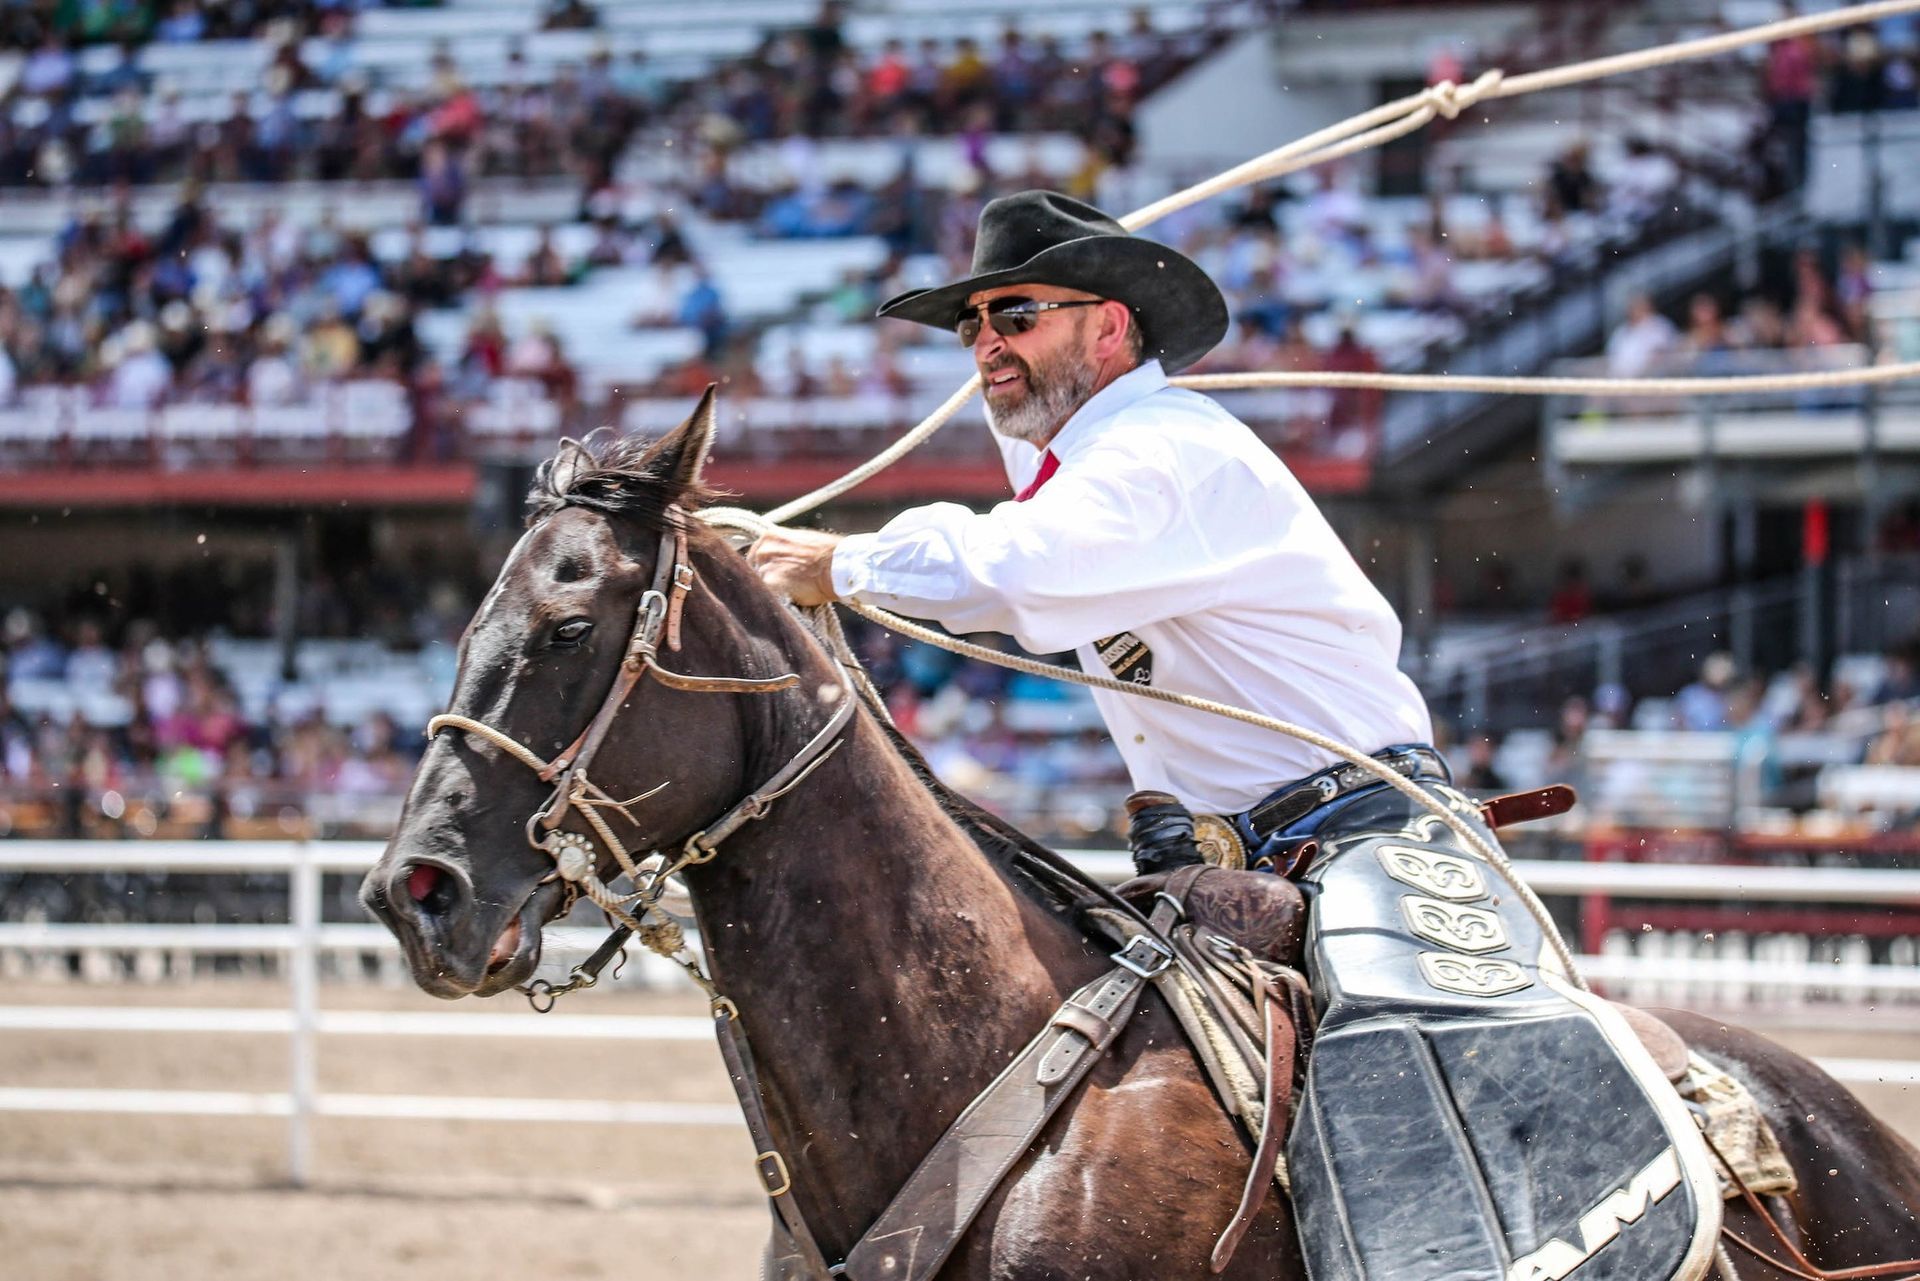 World's Largest Outdoor Rodeo and Western Celebration, world record in Cheyenne, Wyoming